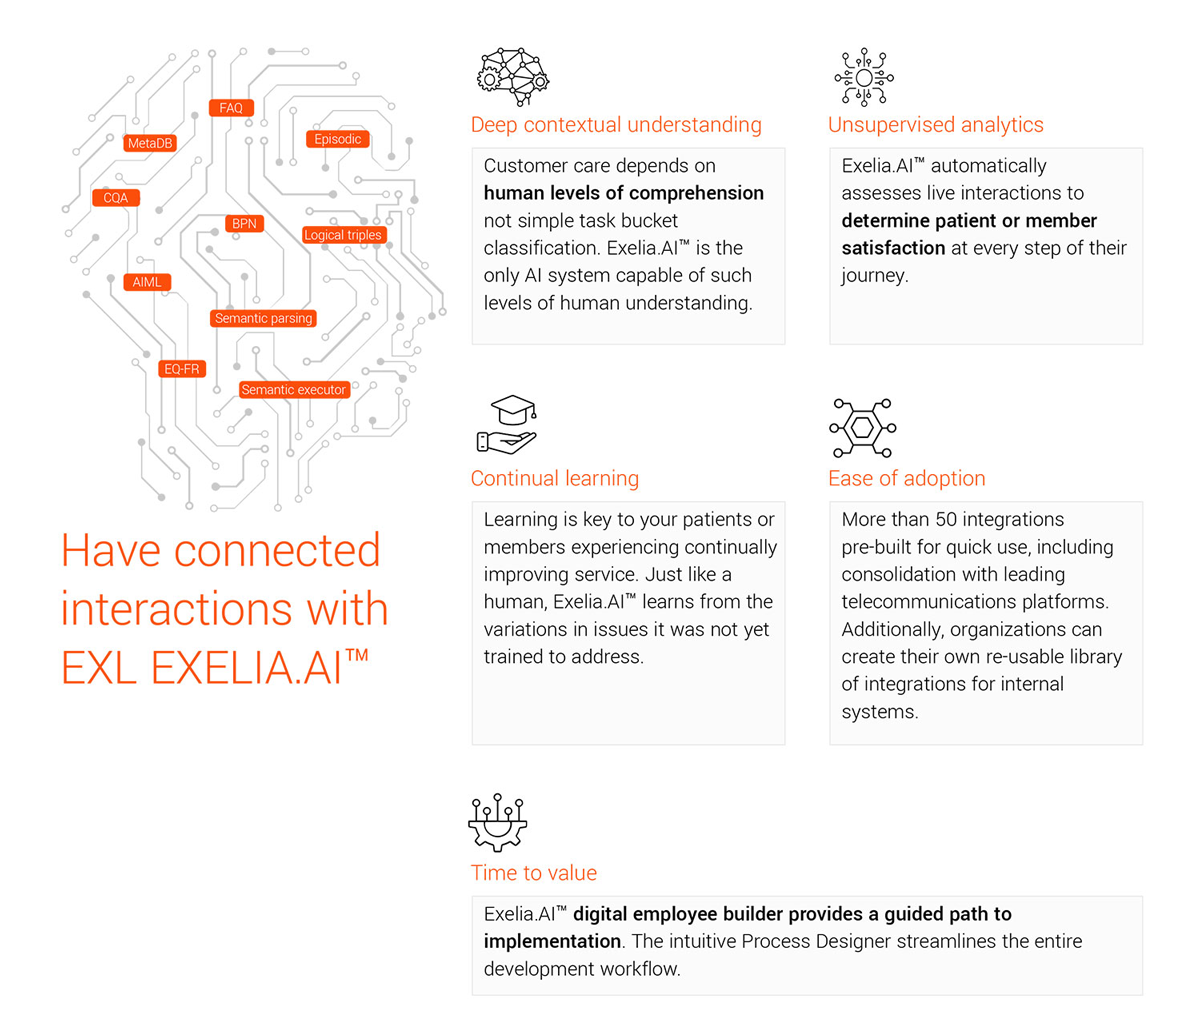 Have connected interactions with EXL EXELIA.AI™